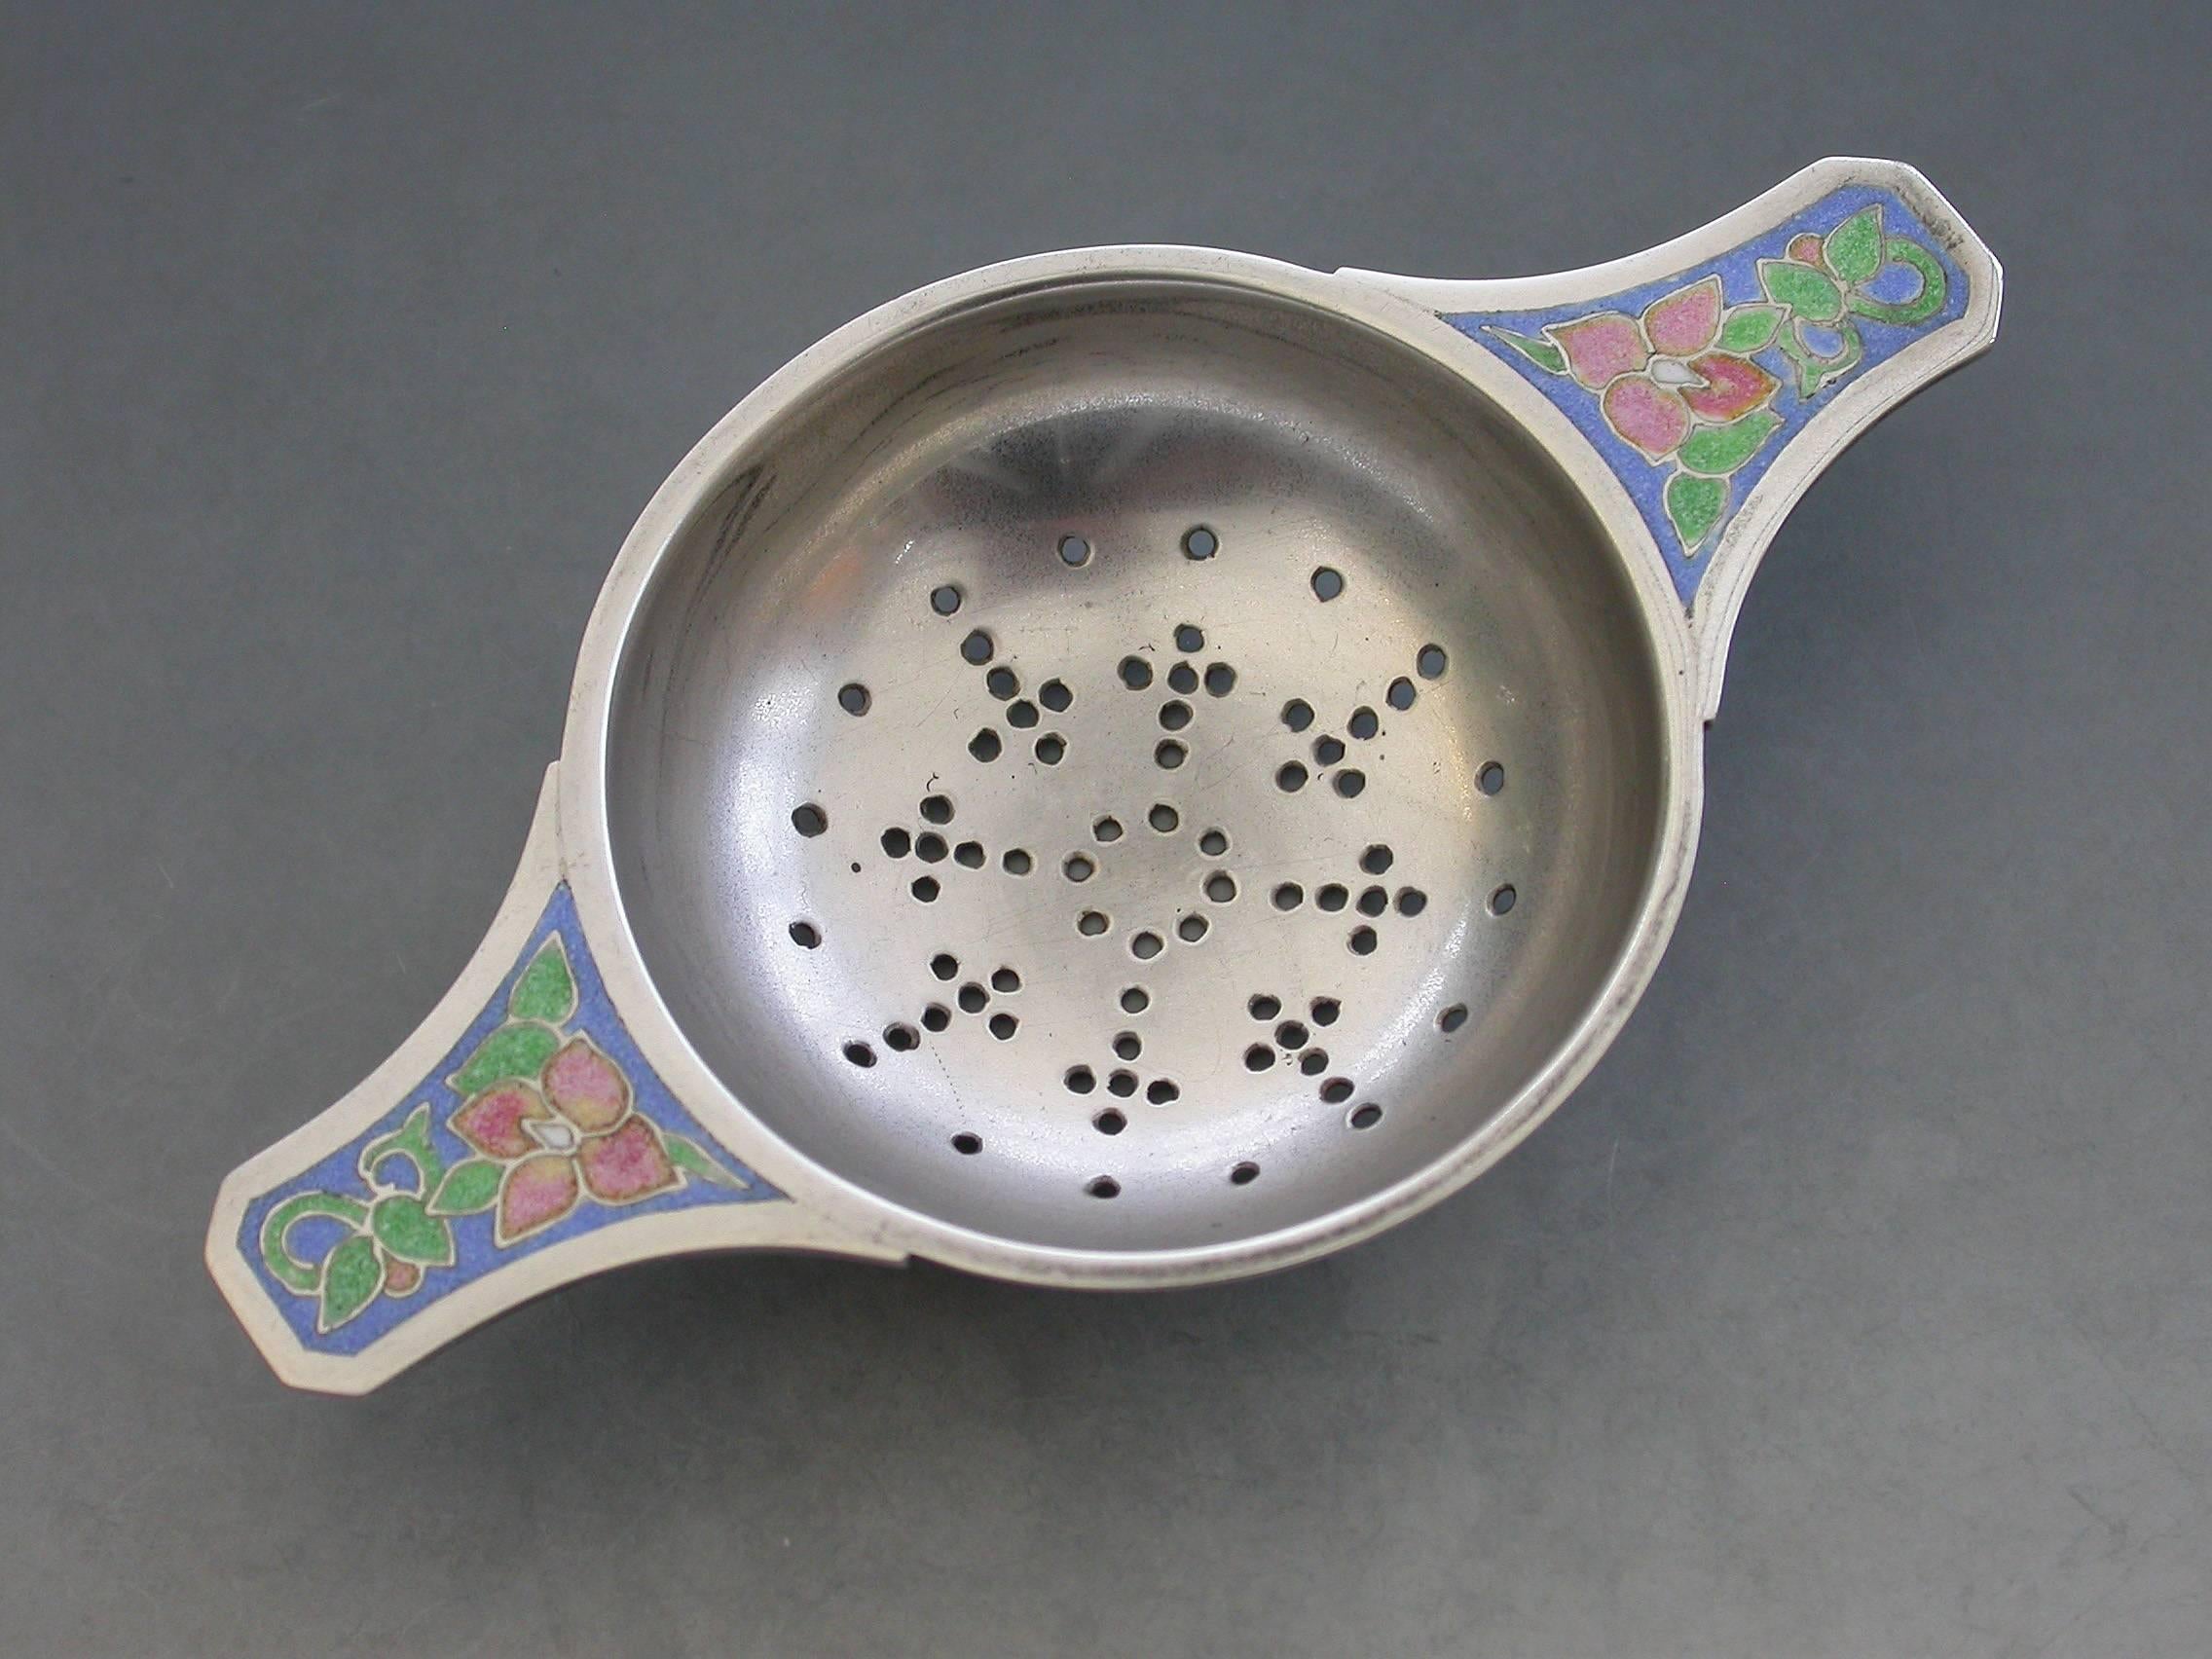 A good early 20th century silver tea strainer made in the Arts & Crafts style, the two lug handles inset with colorful enamel flowers on a blue ground.

By Bernard Instone, Birmingham, 1930.

Also signed with facsimile signature.

In good